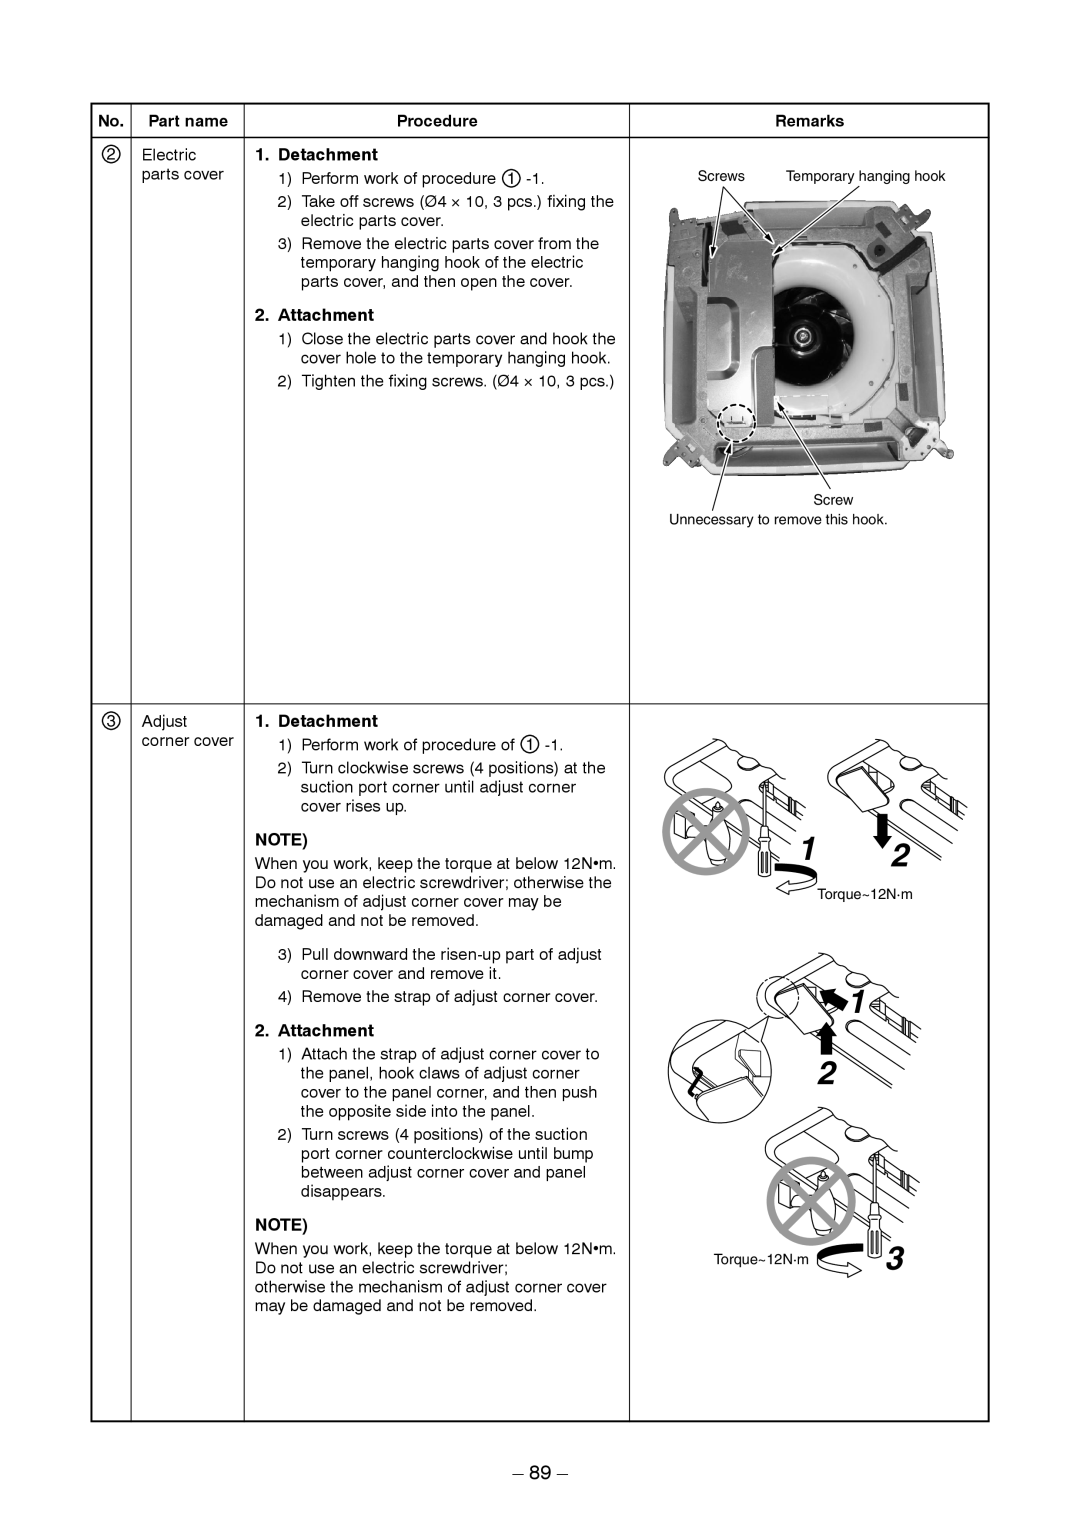 Toshiba CONCEALED DUCK TYPE, CEILING TYPE service manual 89, Detachment, Attachment, Part name, Procedure, Remarks 